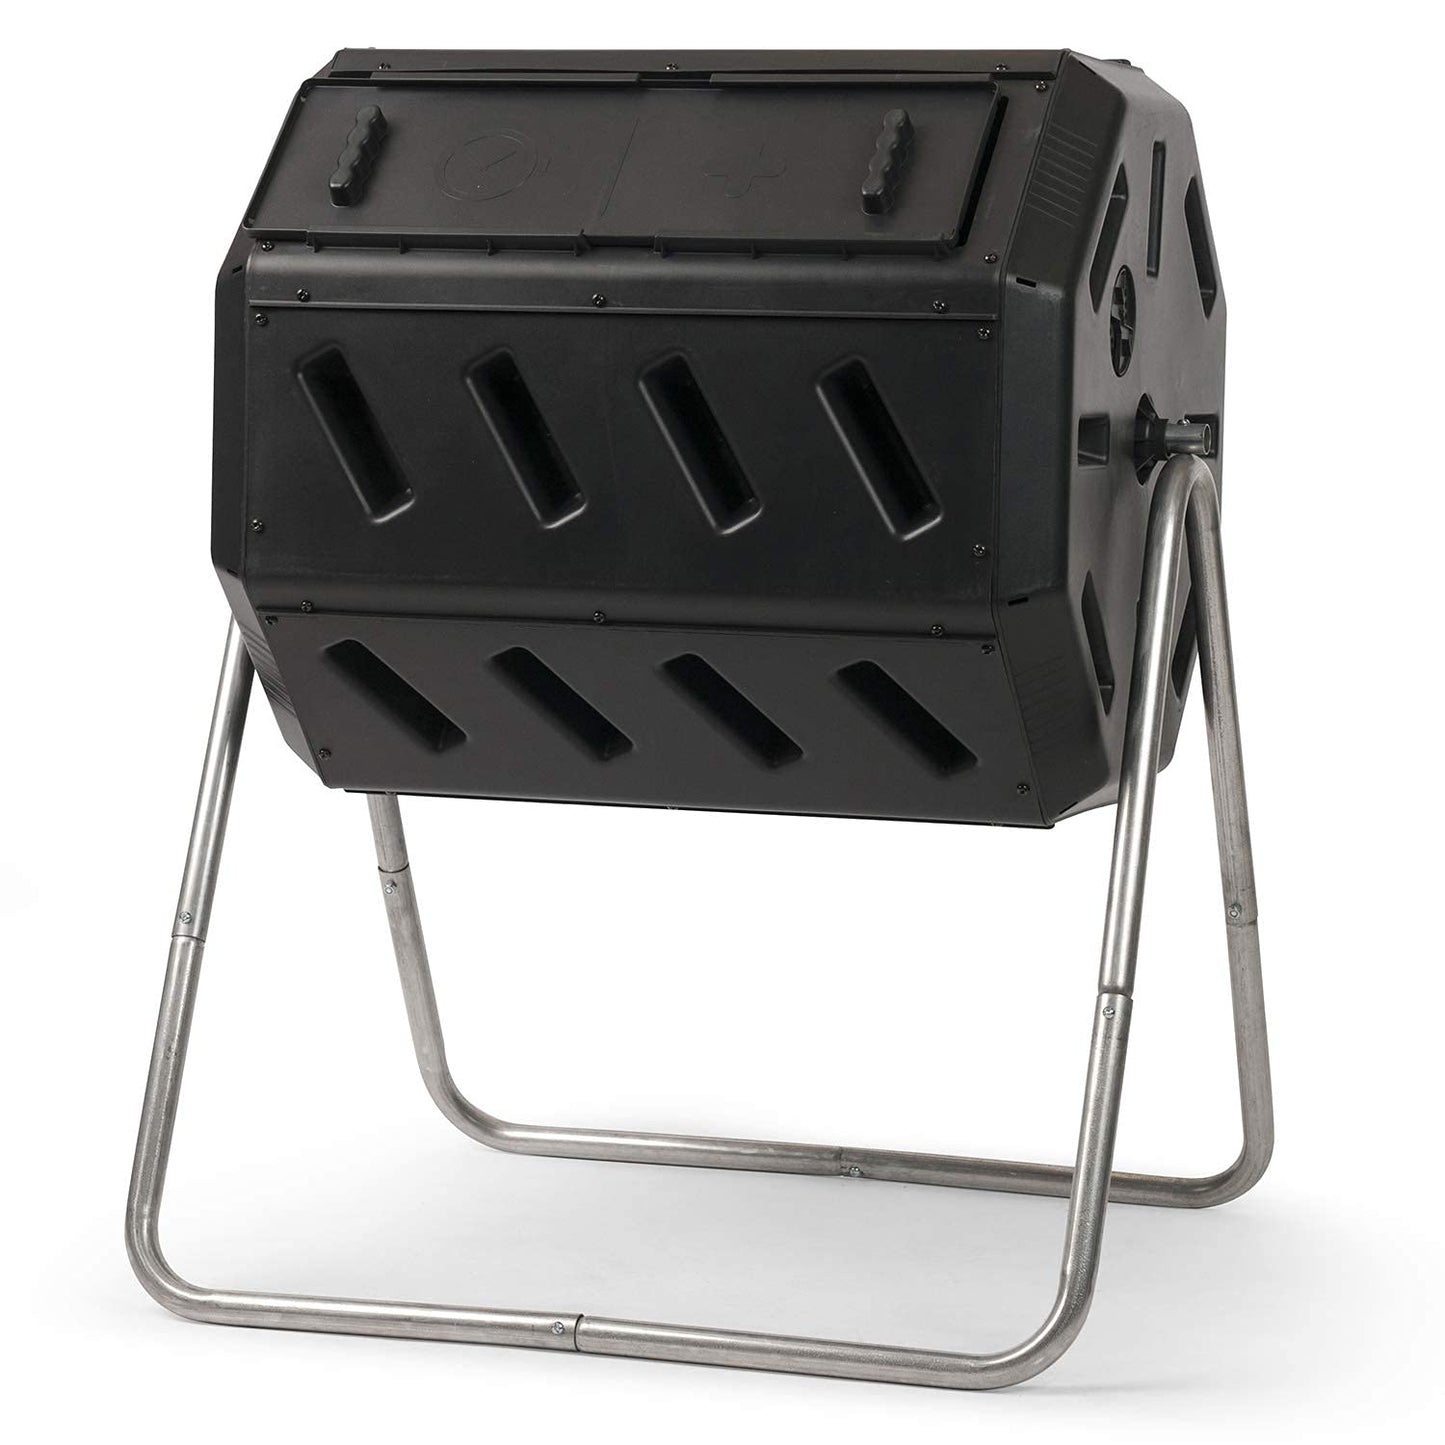 FCMP Outdoor IM4000 Dual Chamber Tumbling Composter Canadian-Made, 100% Recycled Resin - Outdoor Rotating Compost Tumbler Bin for Garden, Kitchen, and Yard Waste, Black (37 Gallon)